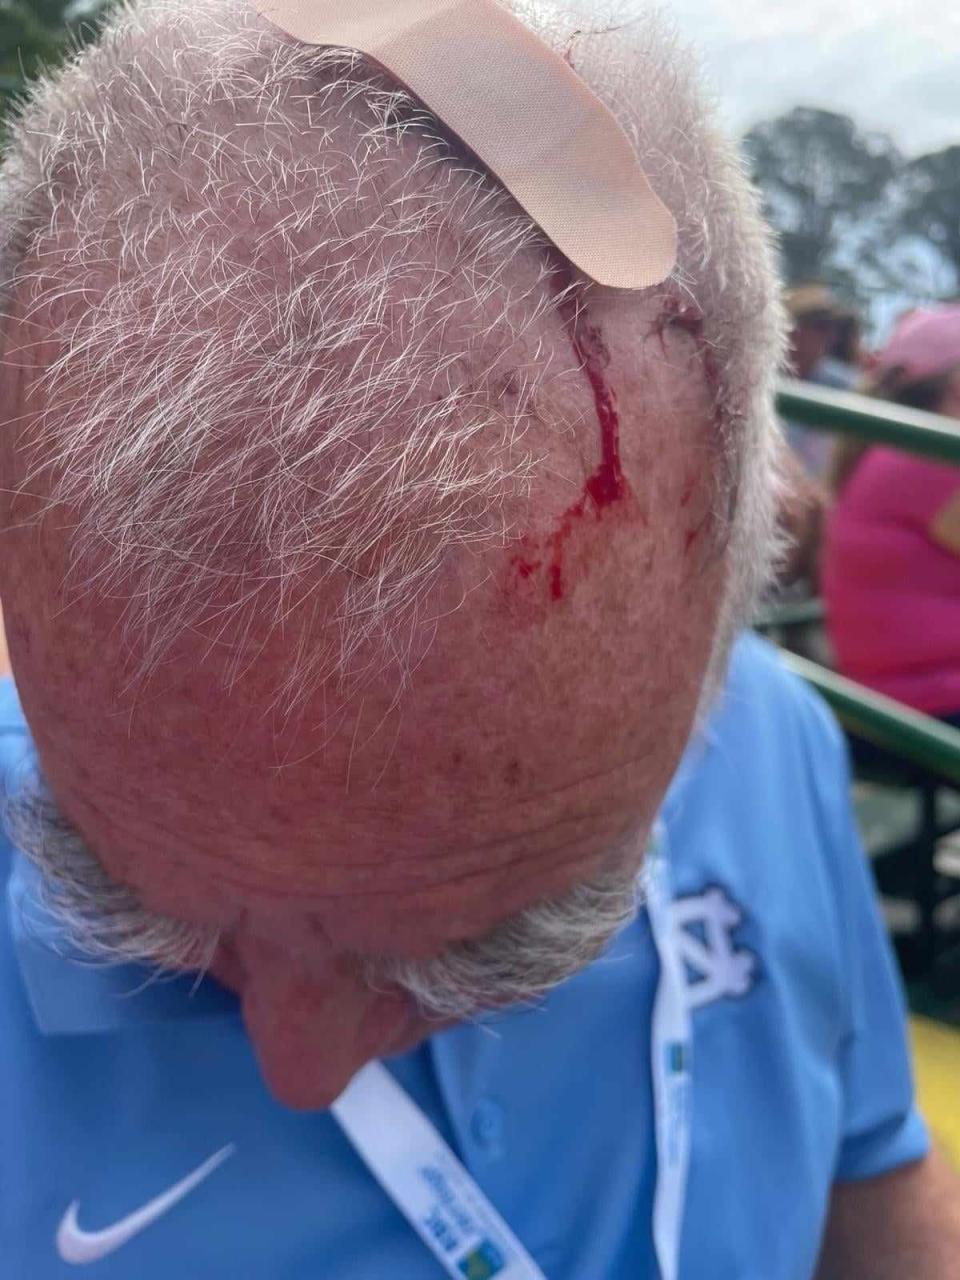 Mike Norman sports a large bandage on his head after he was hit by a golf ball at the RBC Heritage golf tournament on April 19 in Hilton Head, South Carolina.